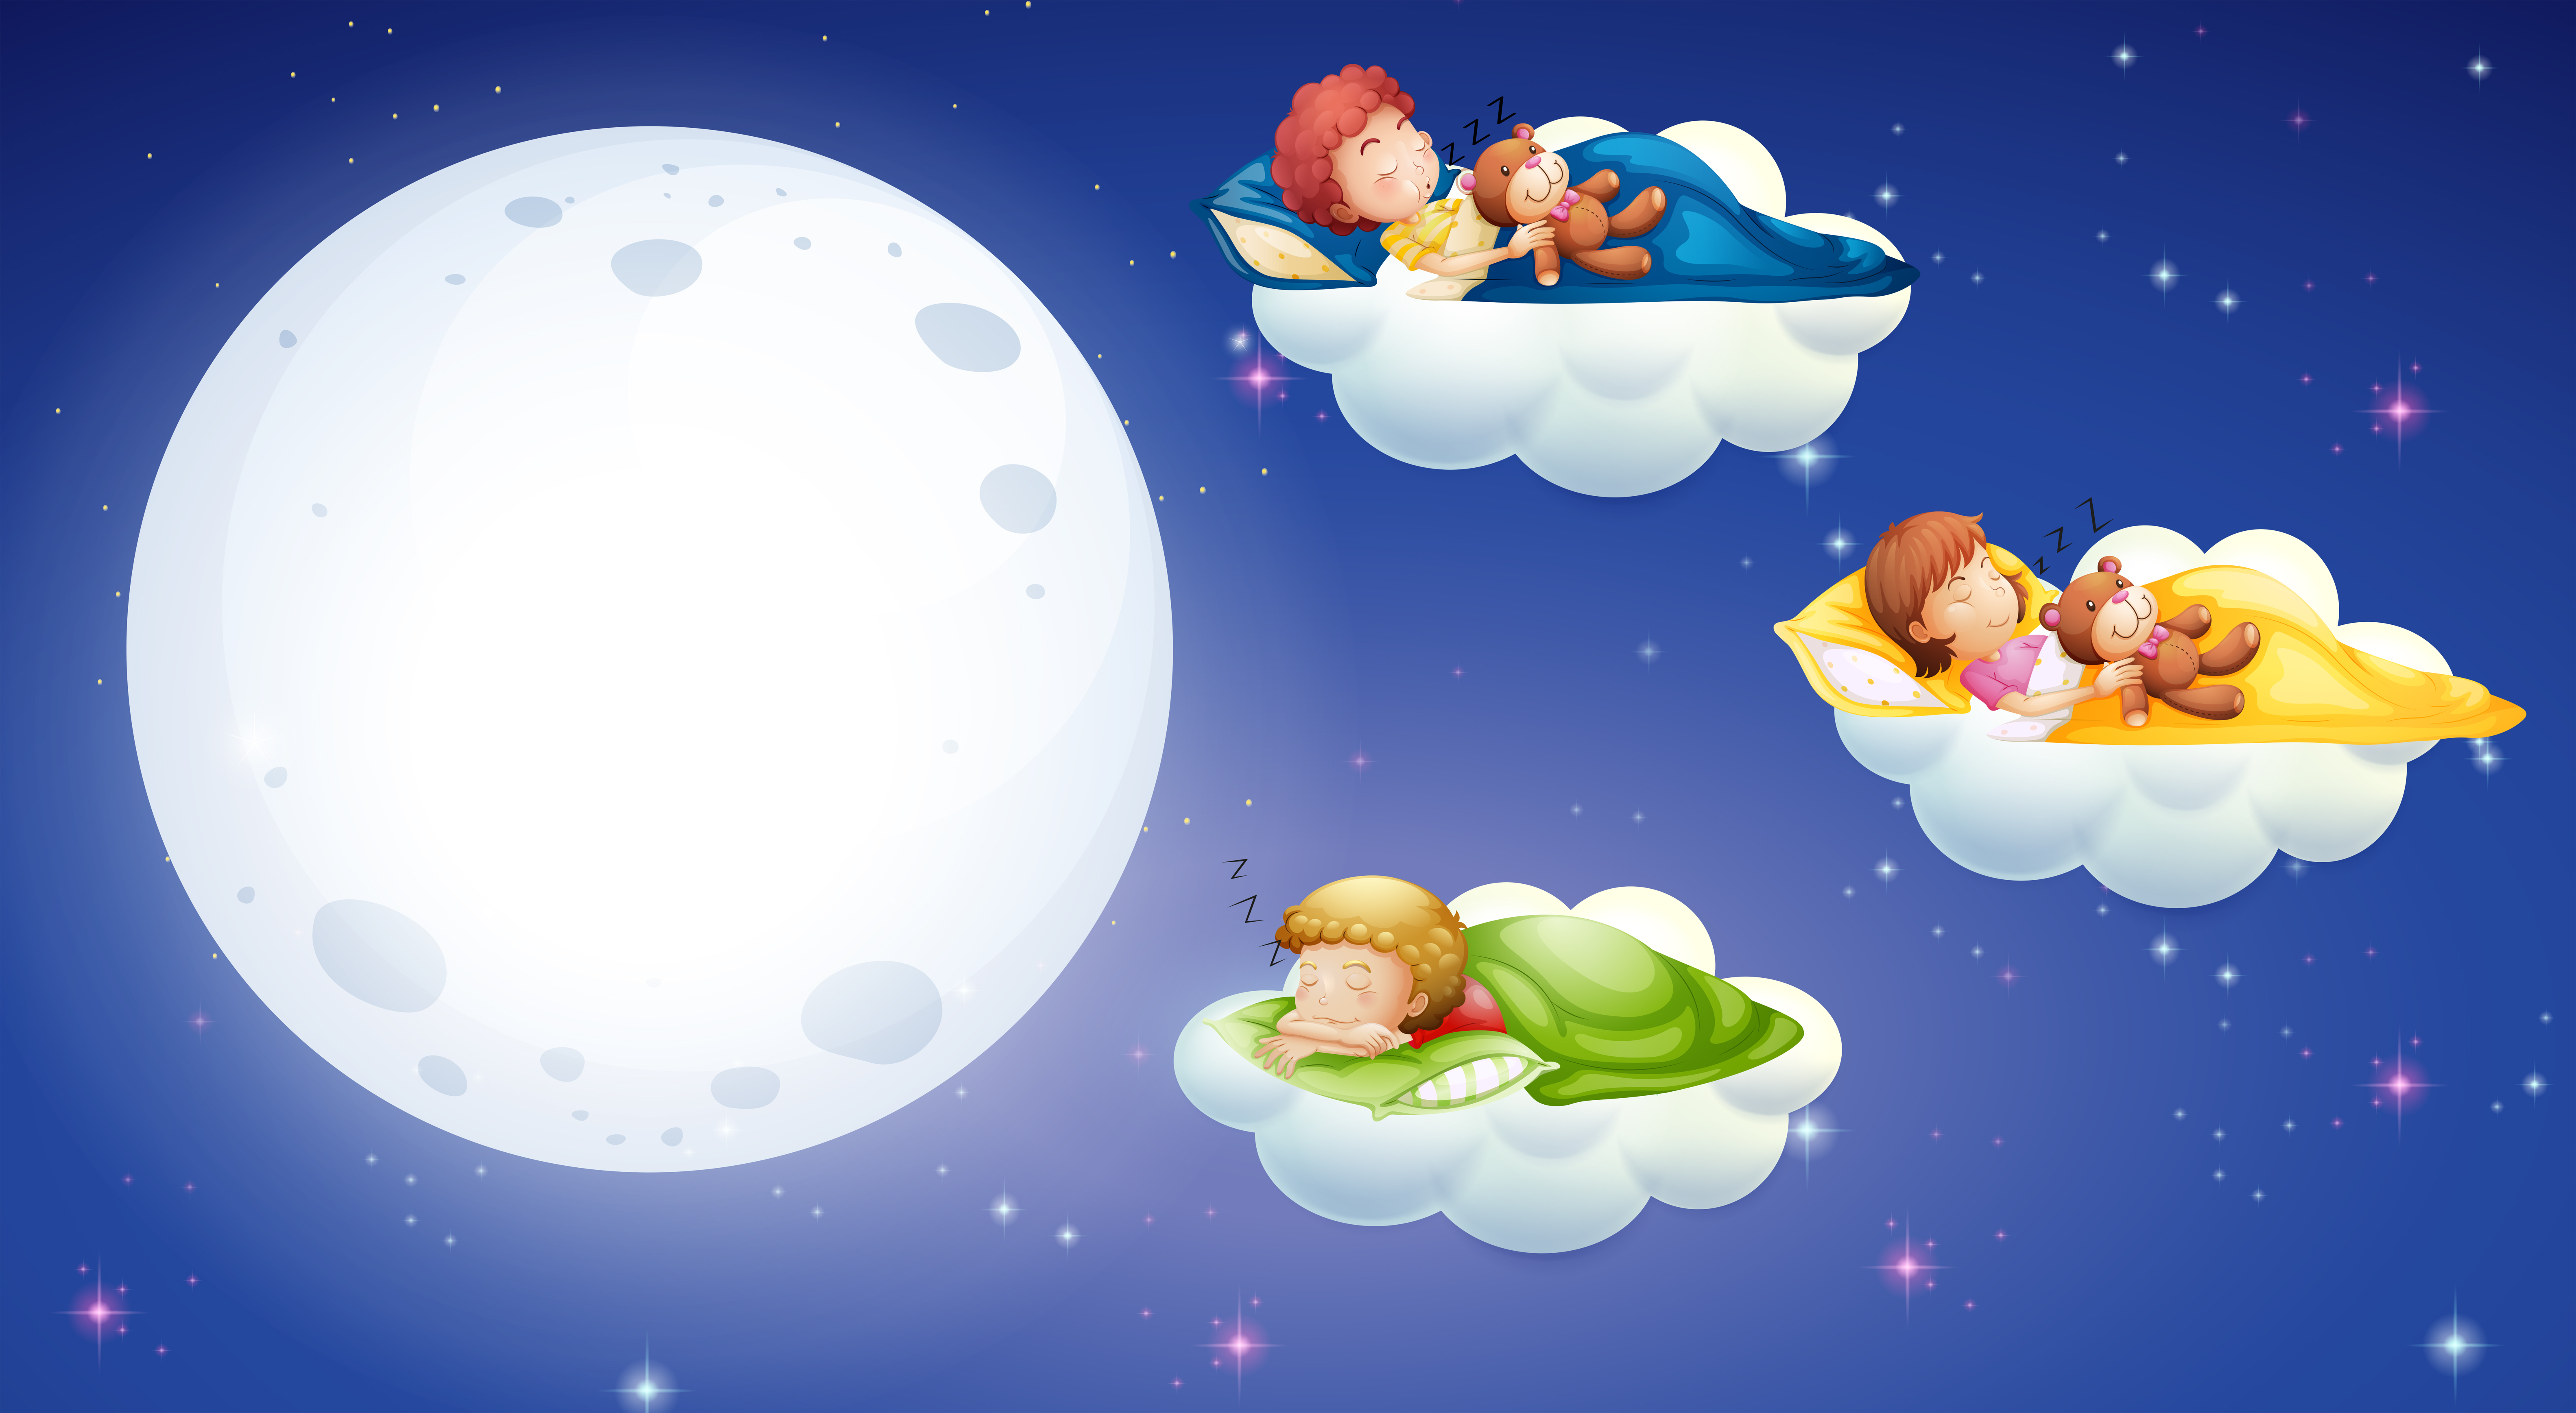 Children sleeping at night time - Download Free Vectors, Clipart